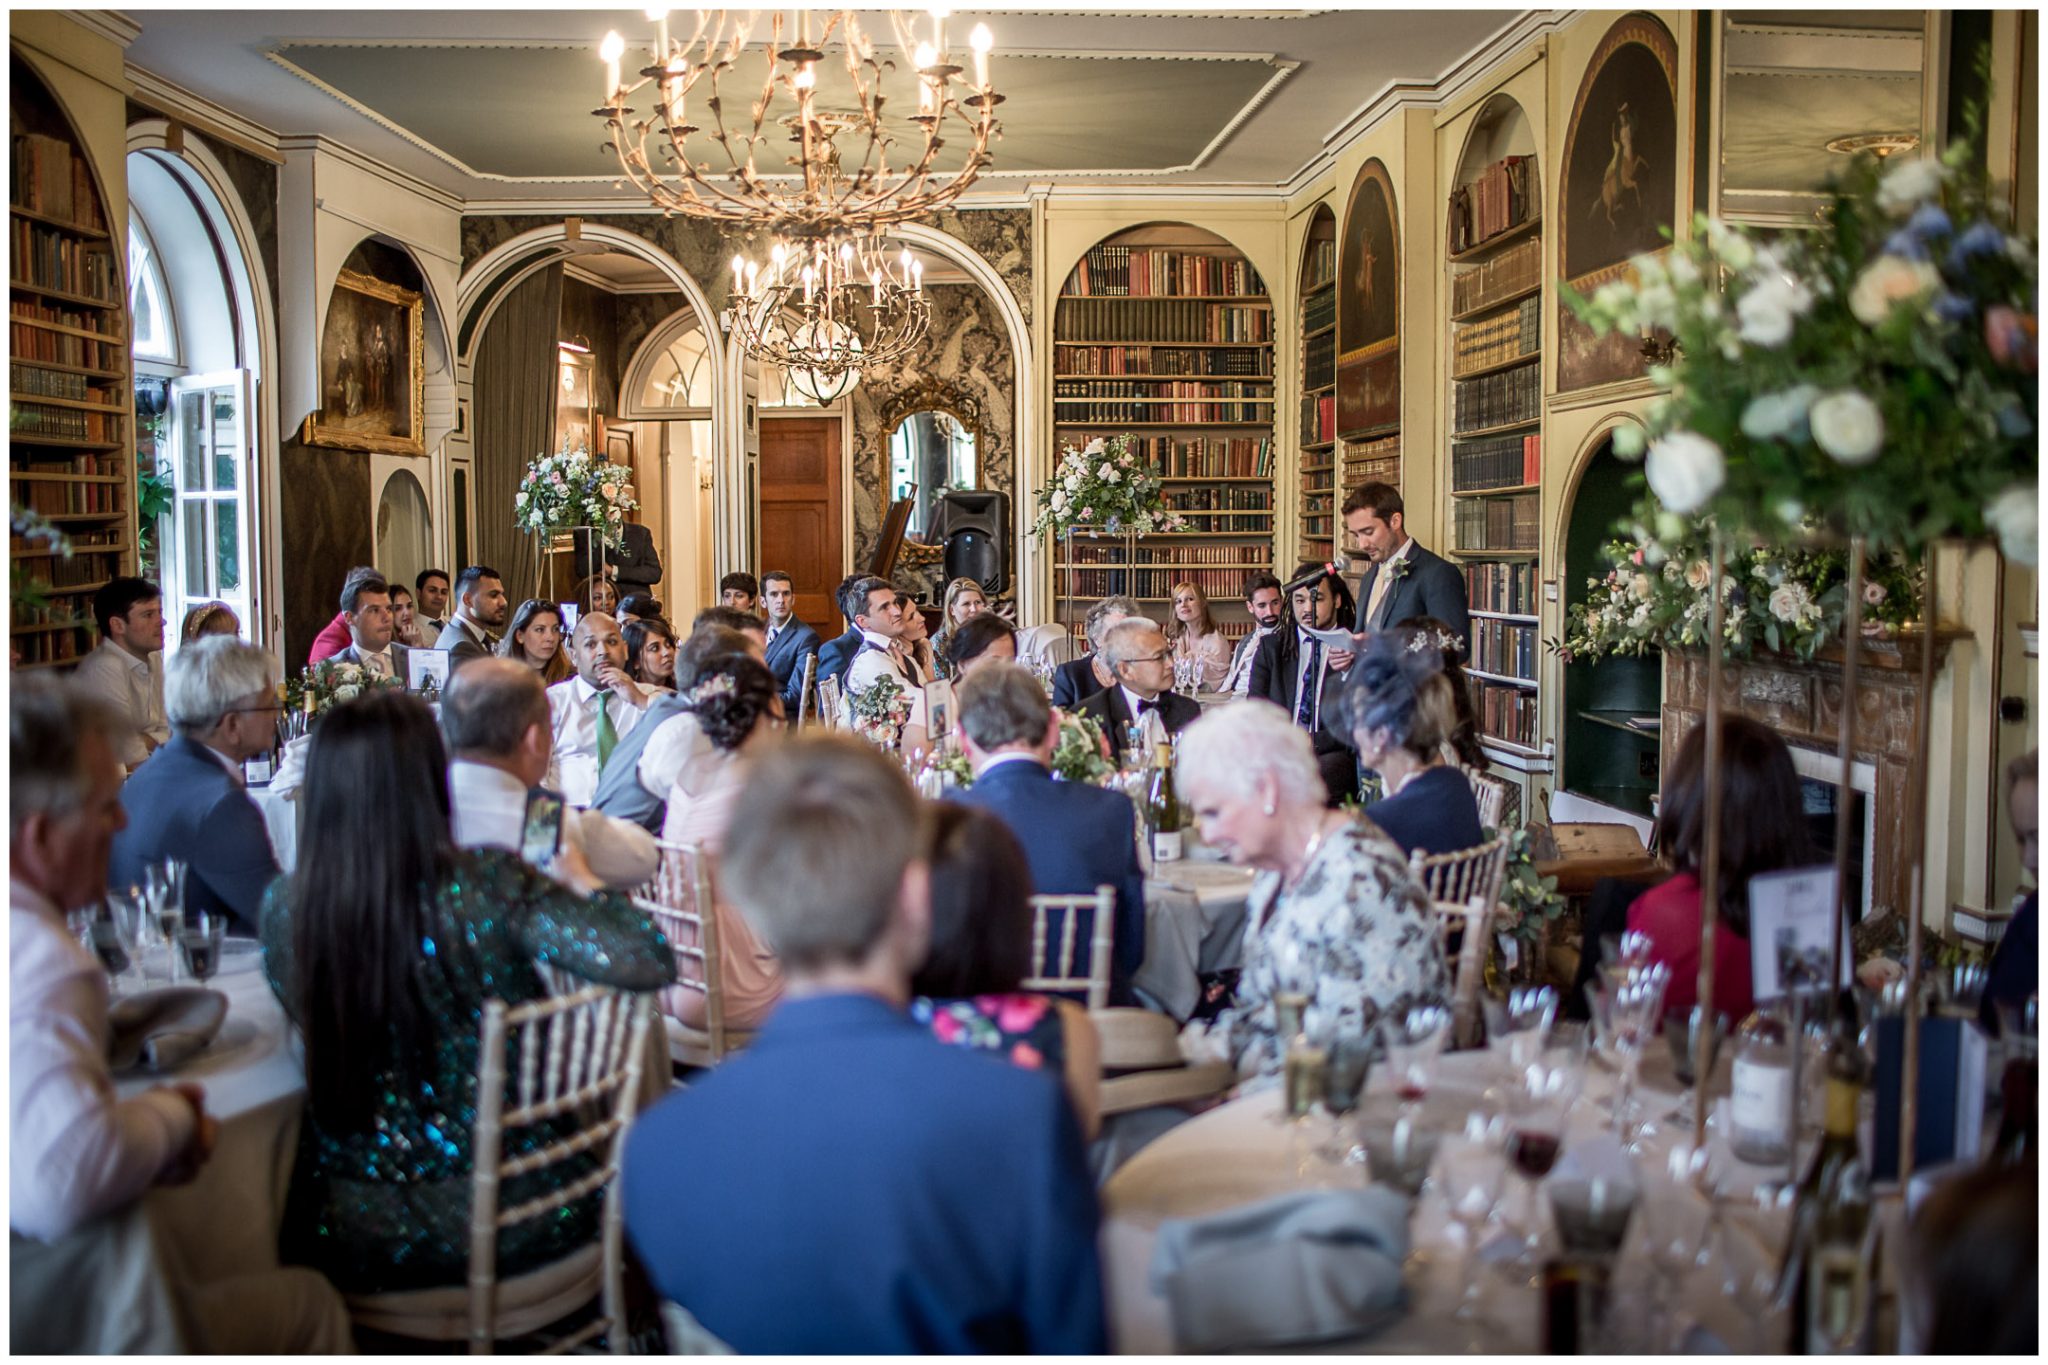 The groom makes his wedding speech in the library of the Hampshire wedding venue